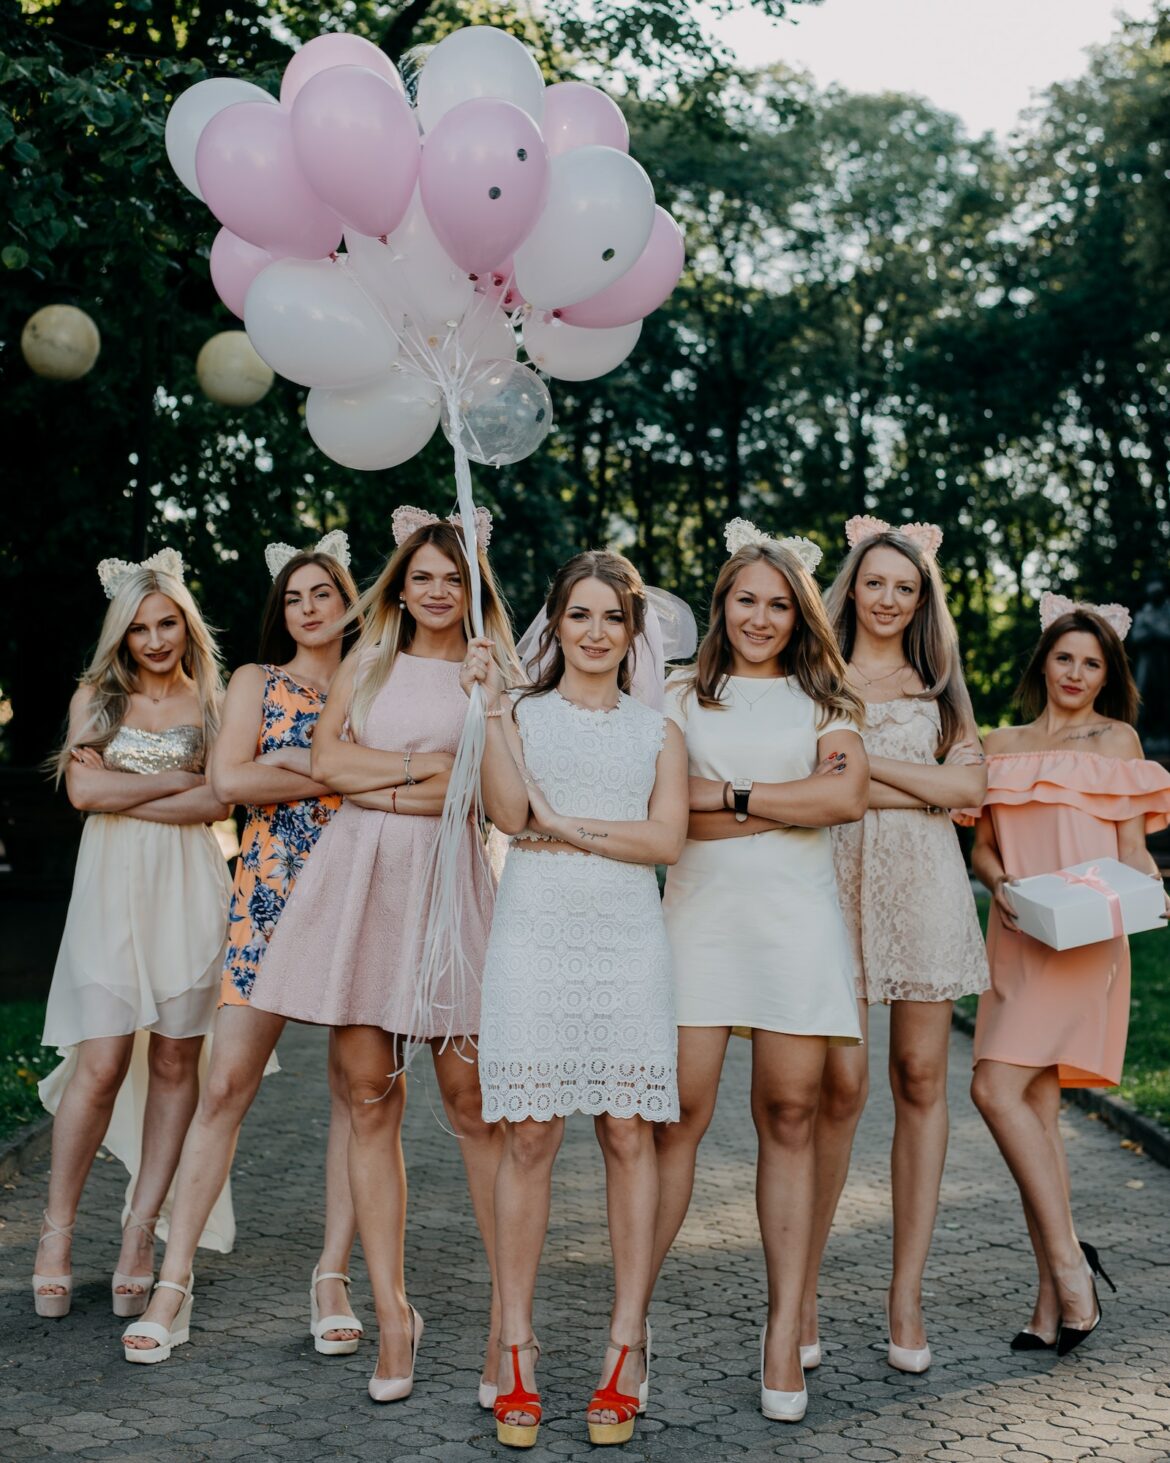 wedding-and-marriage-bachelorette-party-ideas